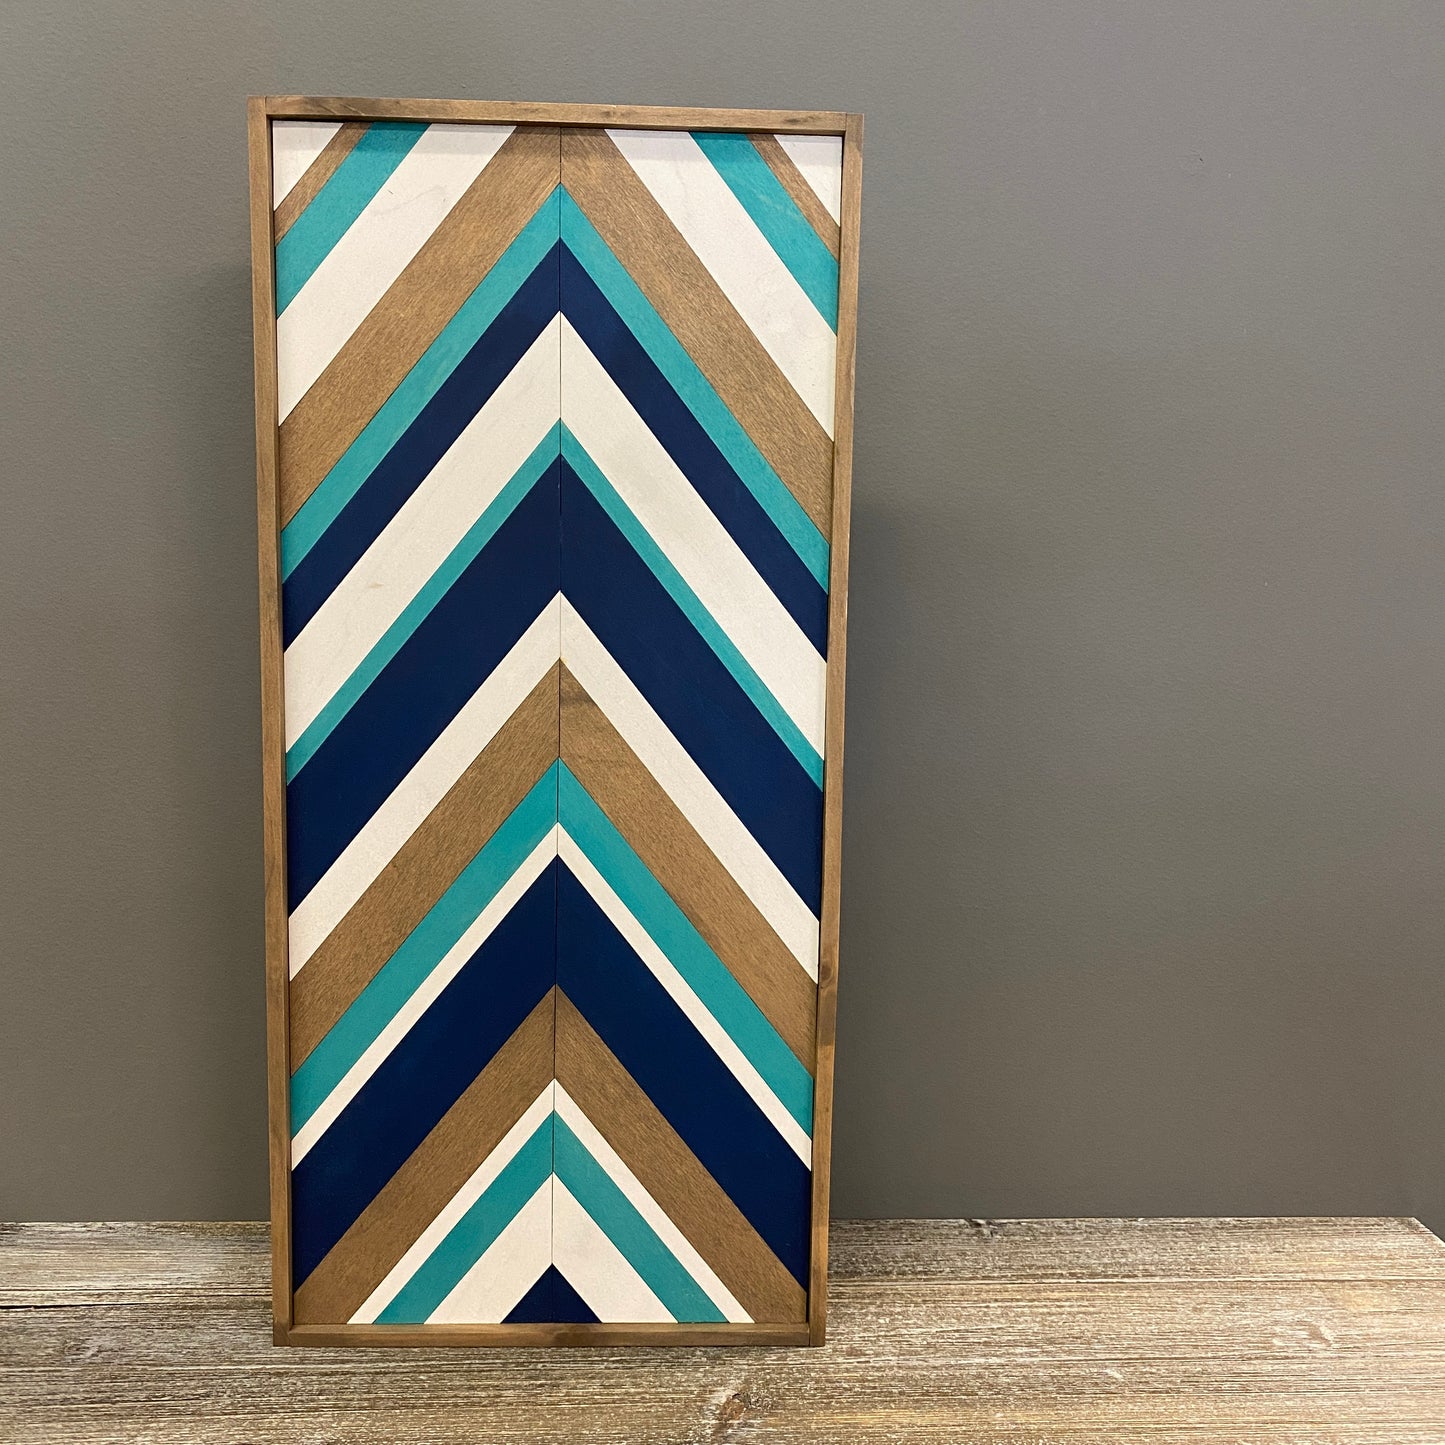 Wood Sign - Teal and Navy Blue Chevron Quilt